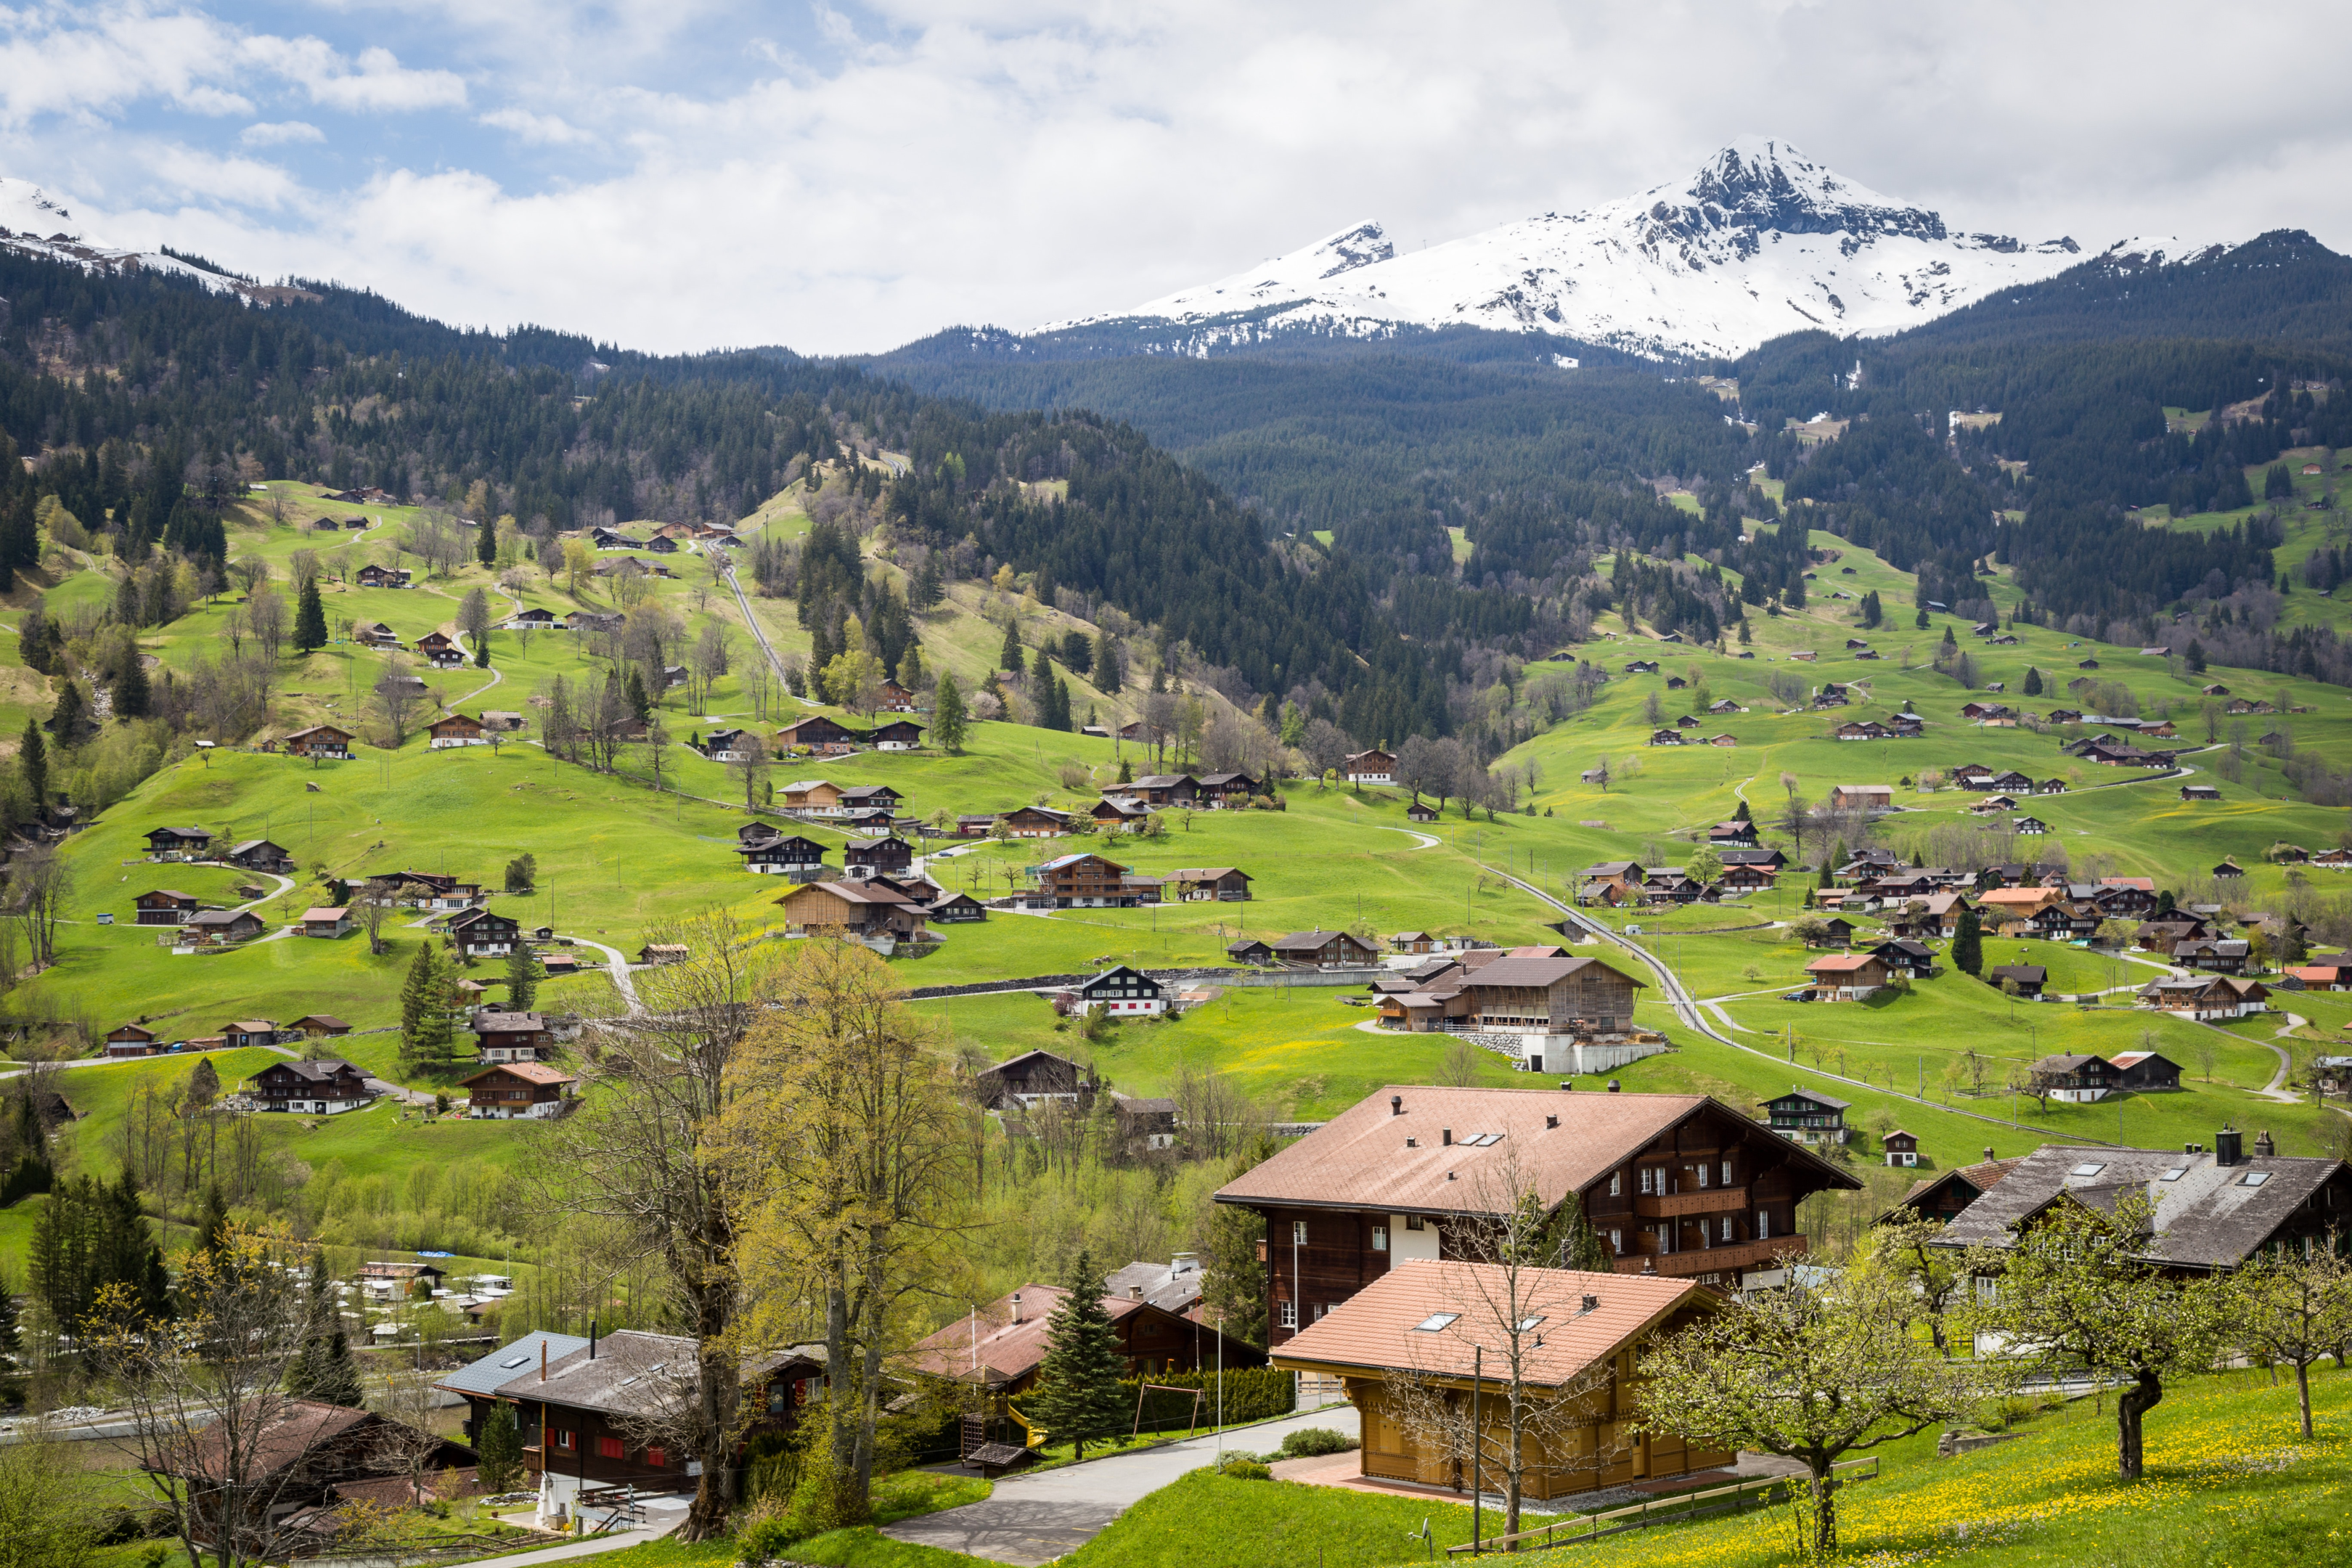 Switzerland is known for its iconic architectural design in the middle of nature’s scenic views